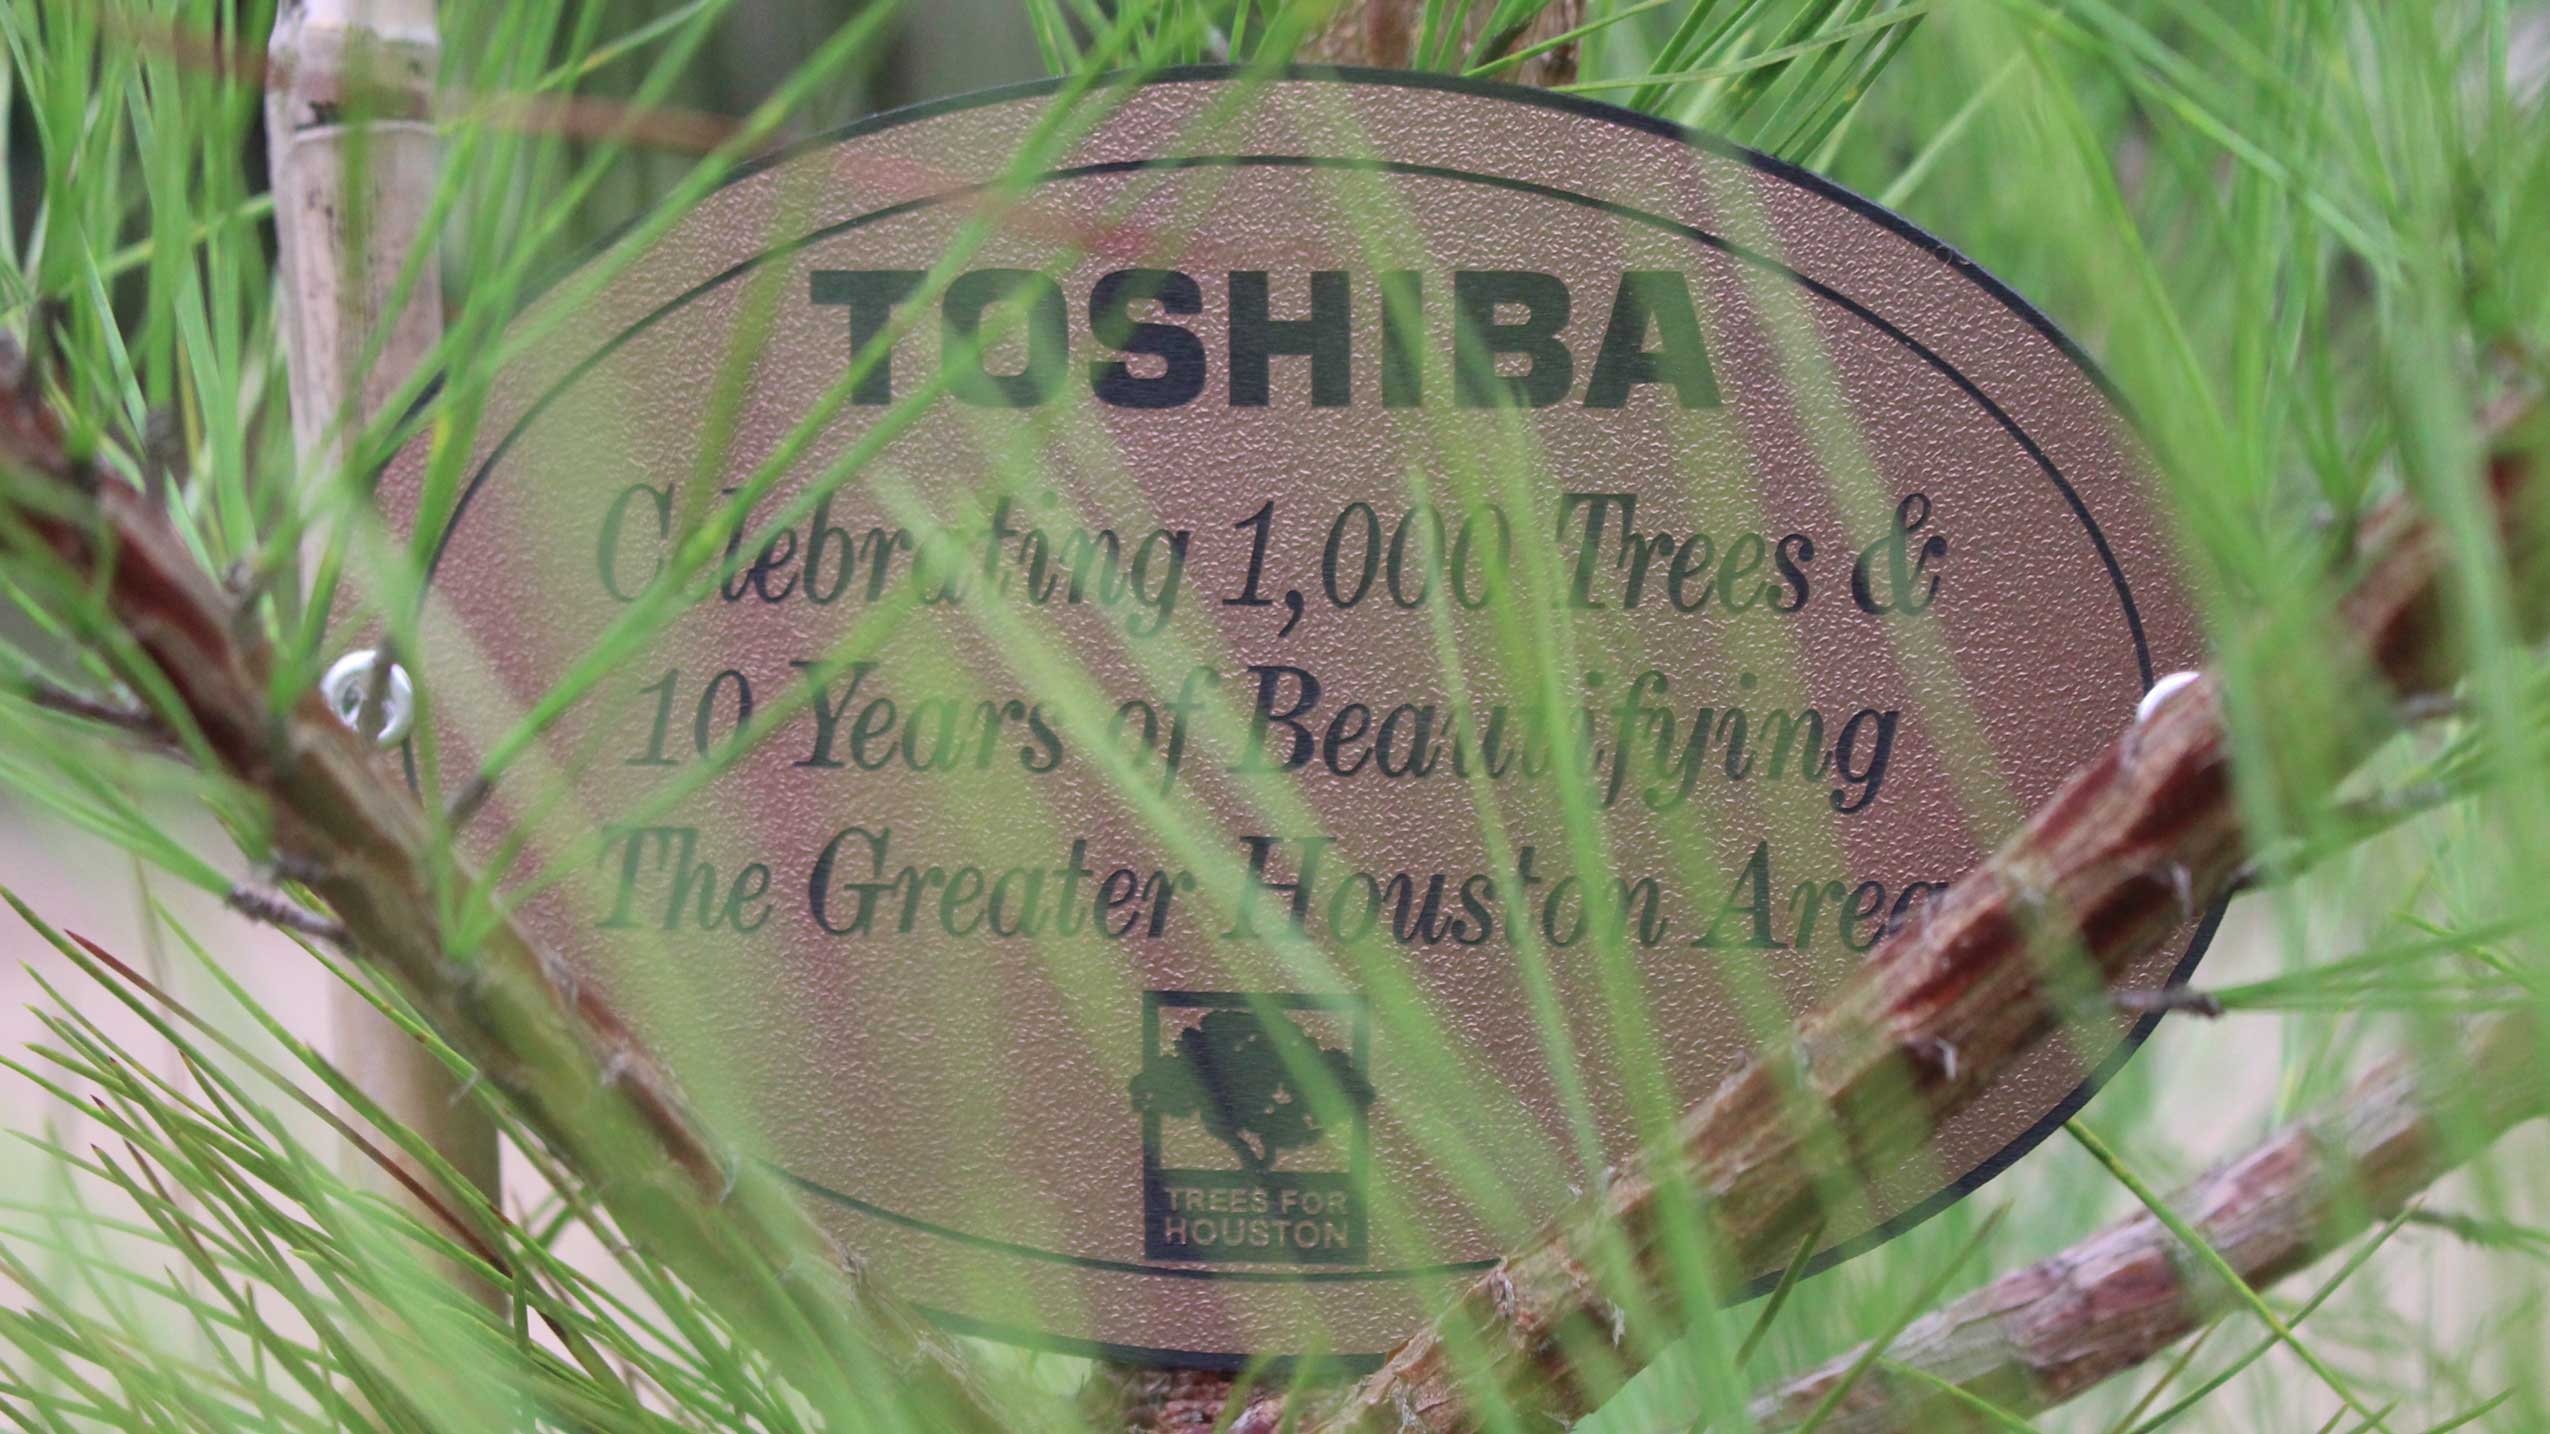 Toshiba Plants 1,000th Tree With Trees For Houston